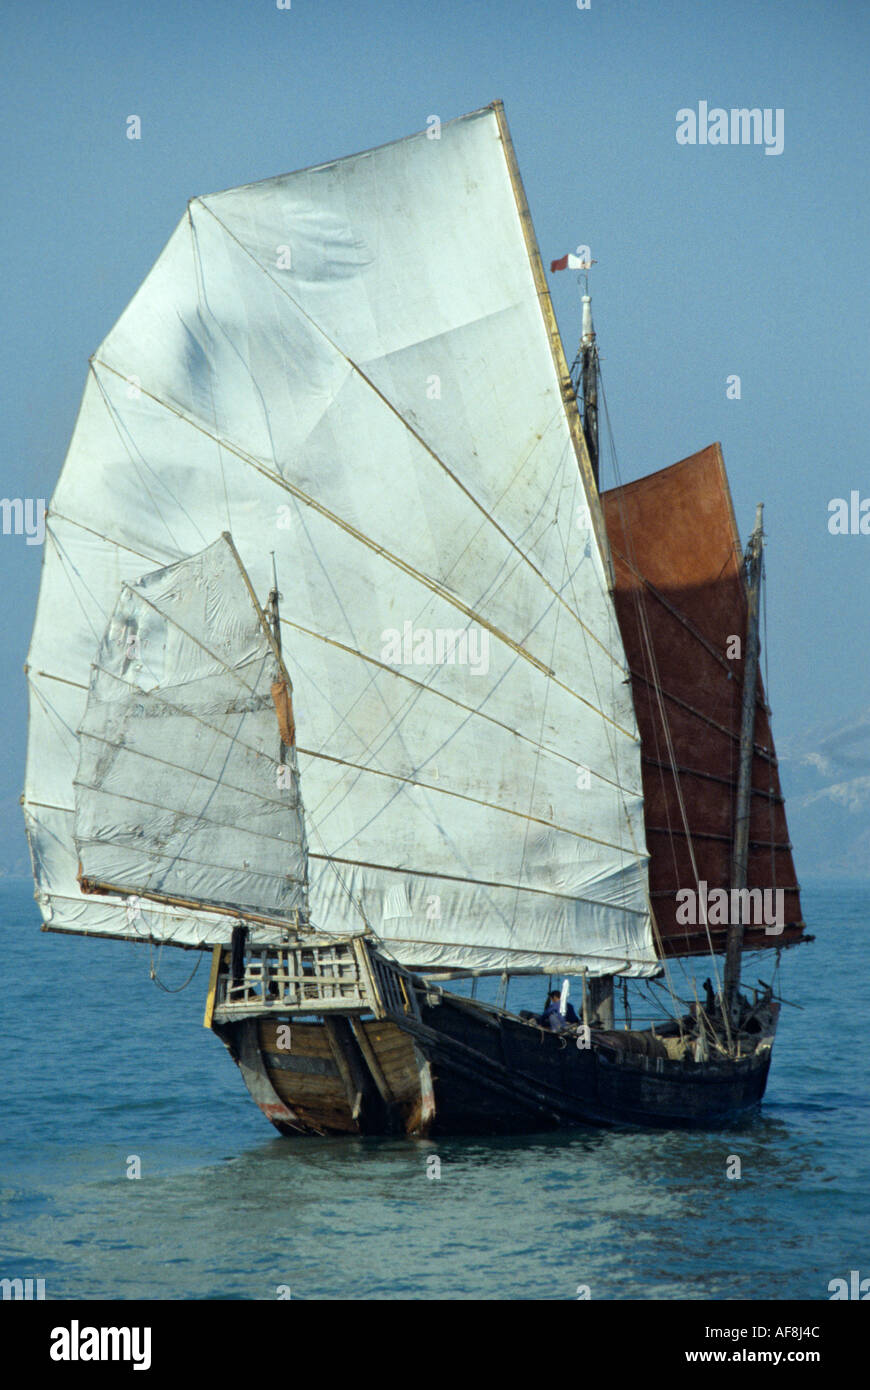 Stern view of a traditional genuine old local sailing junk in the late 1970s in Victoria Harbour Hong Kong Island Stock Photo